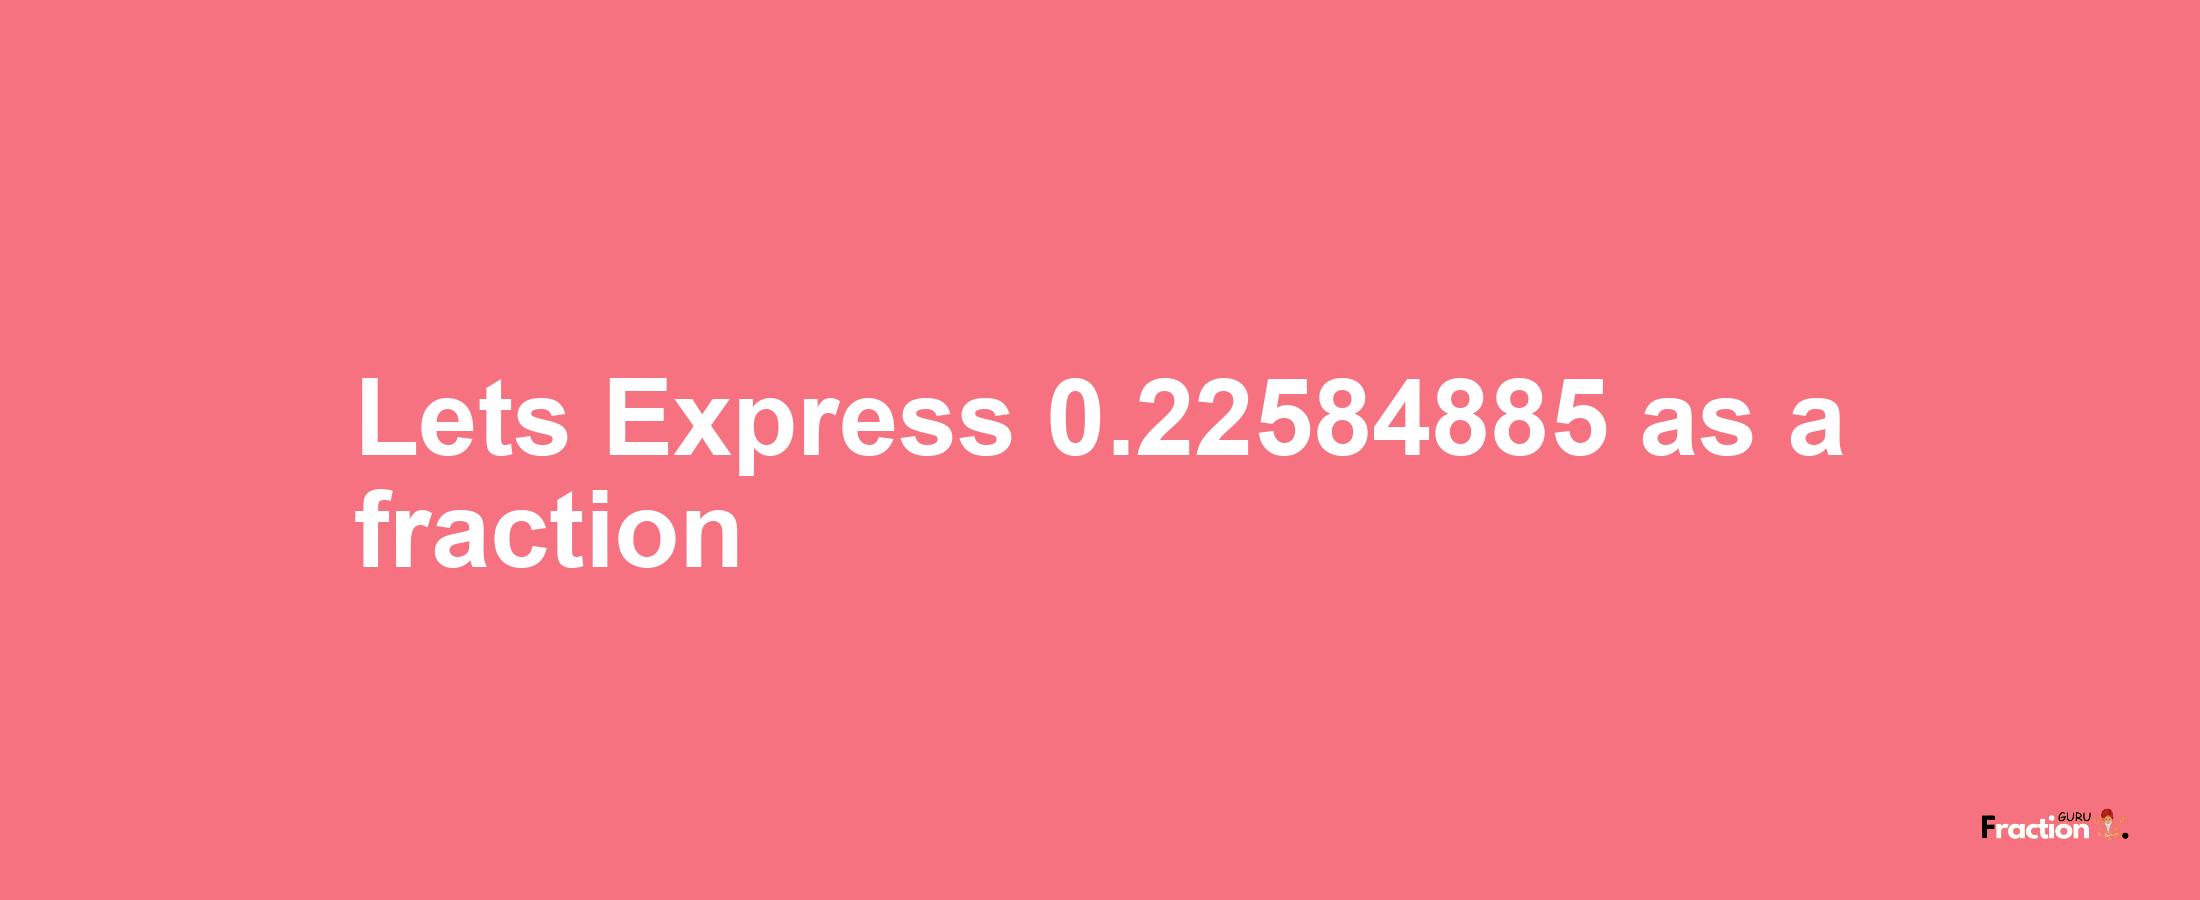 Lets Express 0.22584885 as afraction